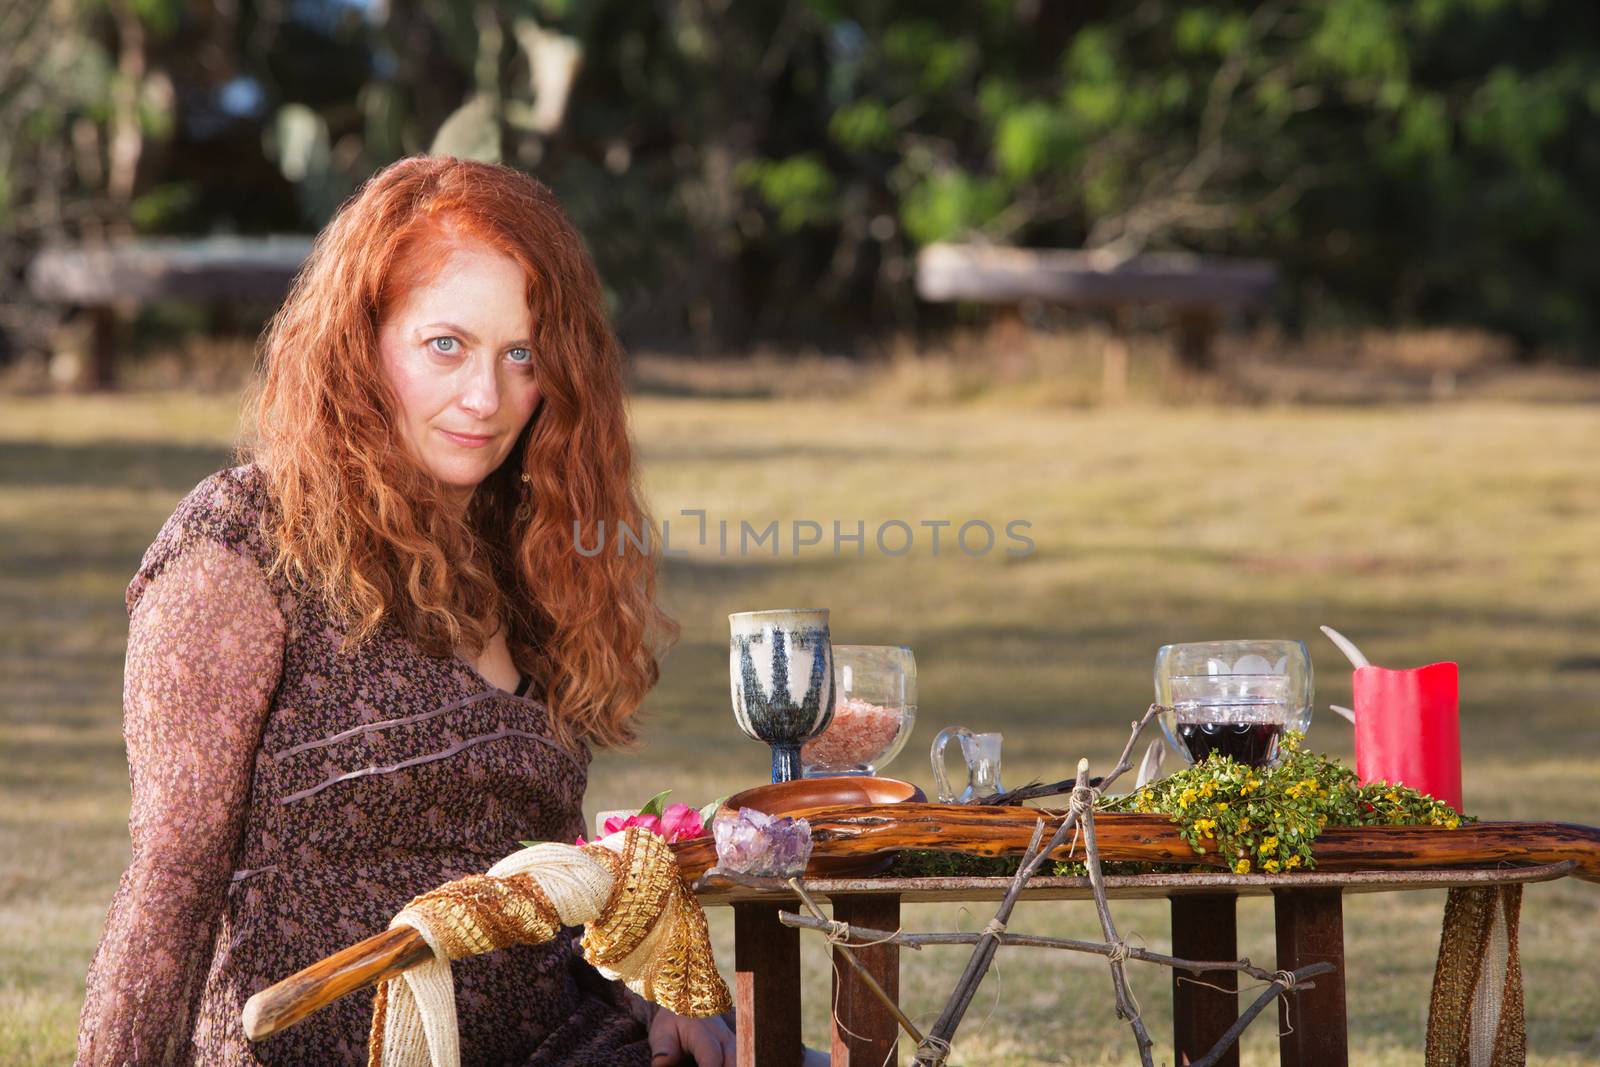 Female Wicca priestess with staff and goblets on altar